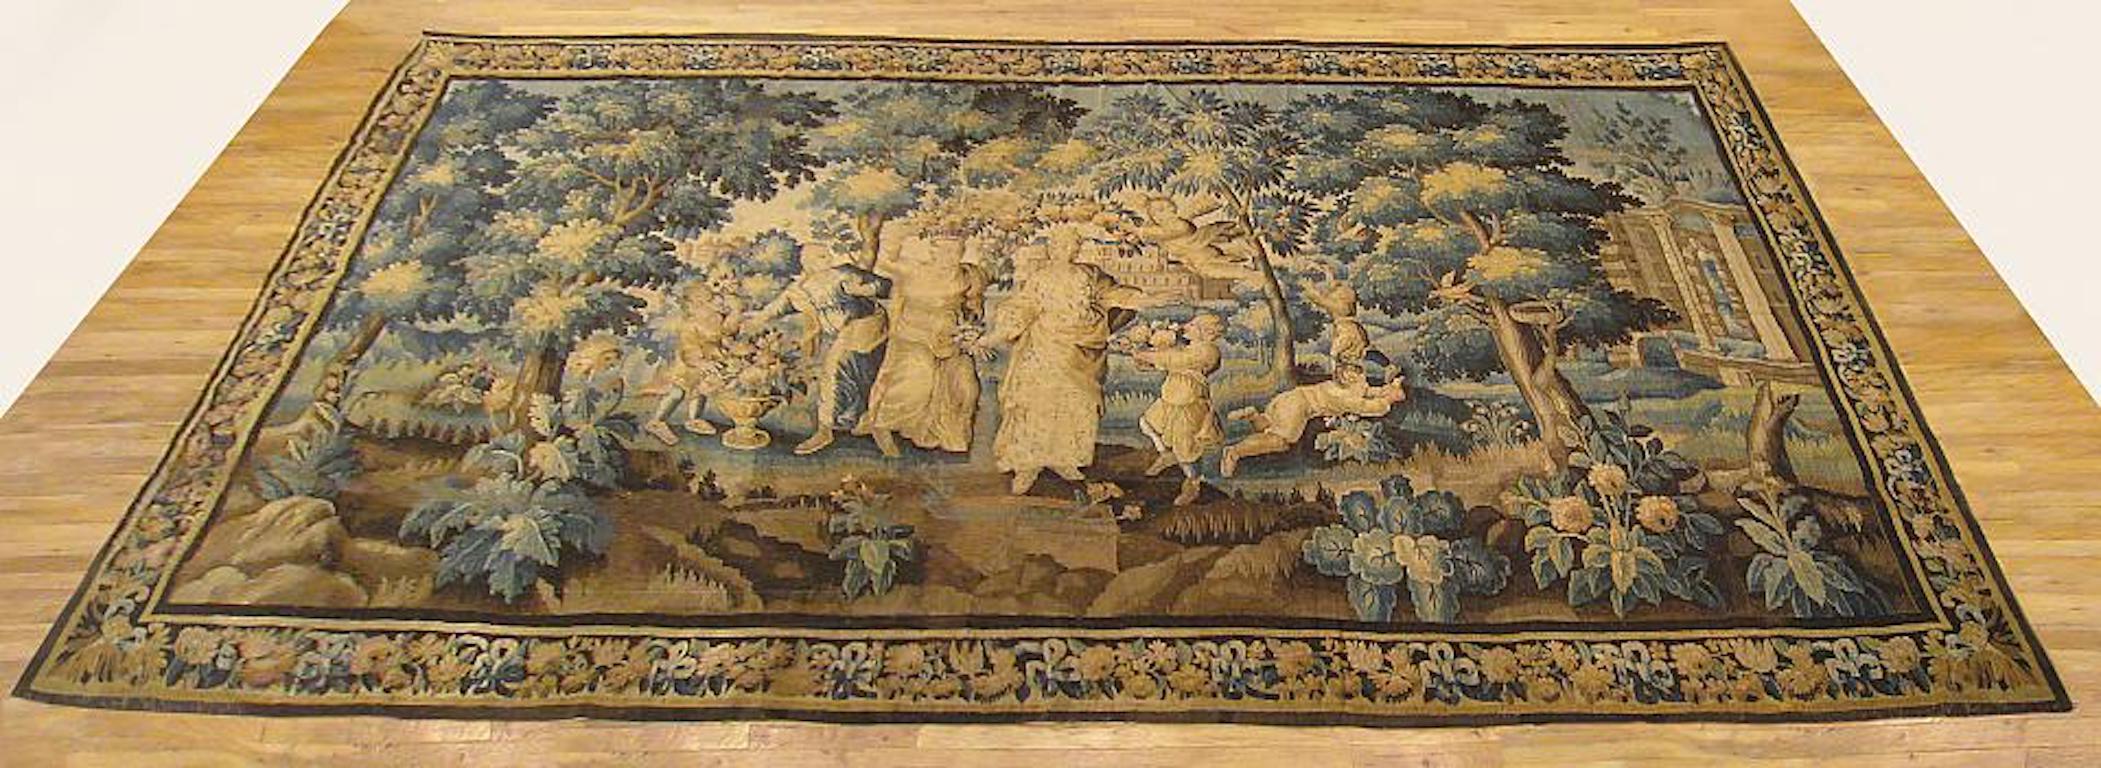 A French Aubusson “Louis XIV” allegorical tapestry from the late 17th or early 18th century, depicting an allegory of Spring, with Flora crowned by Zephyr, surrounded by other mythological figures and children in a lush verdant landscape. This